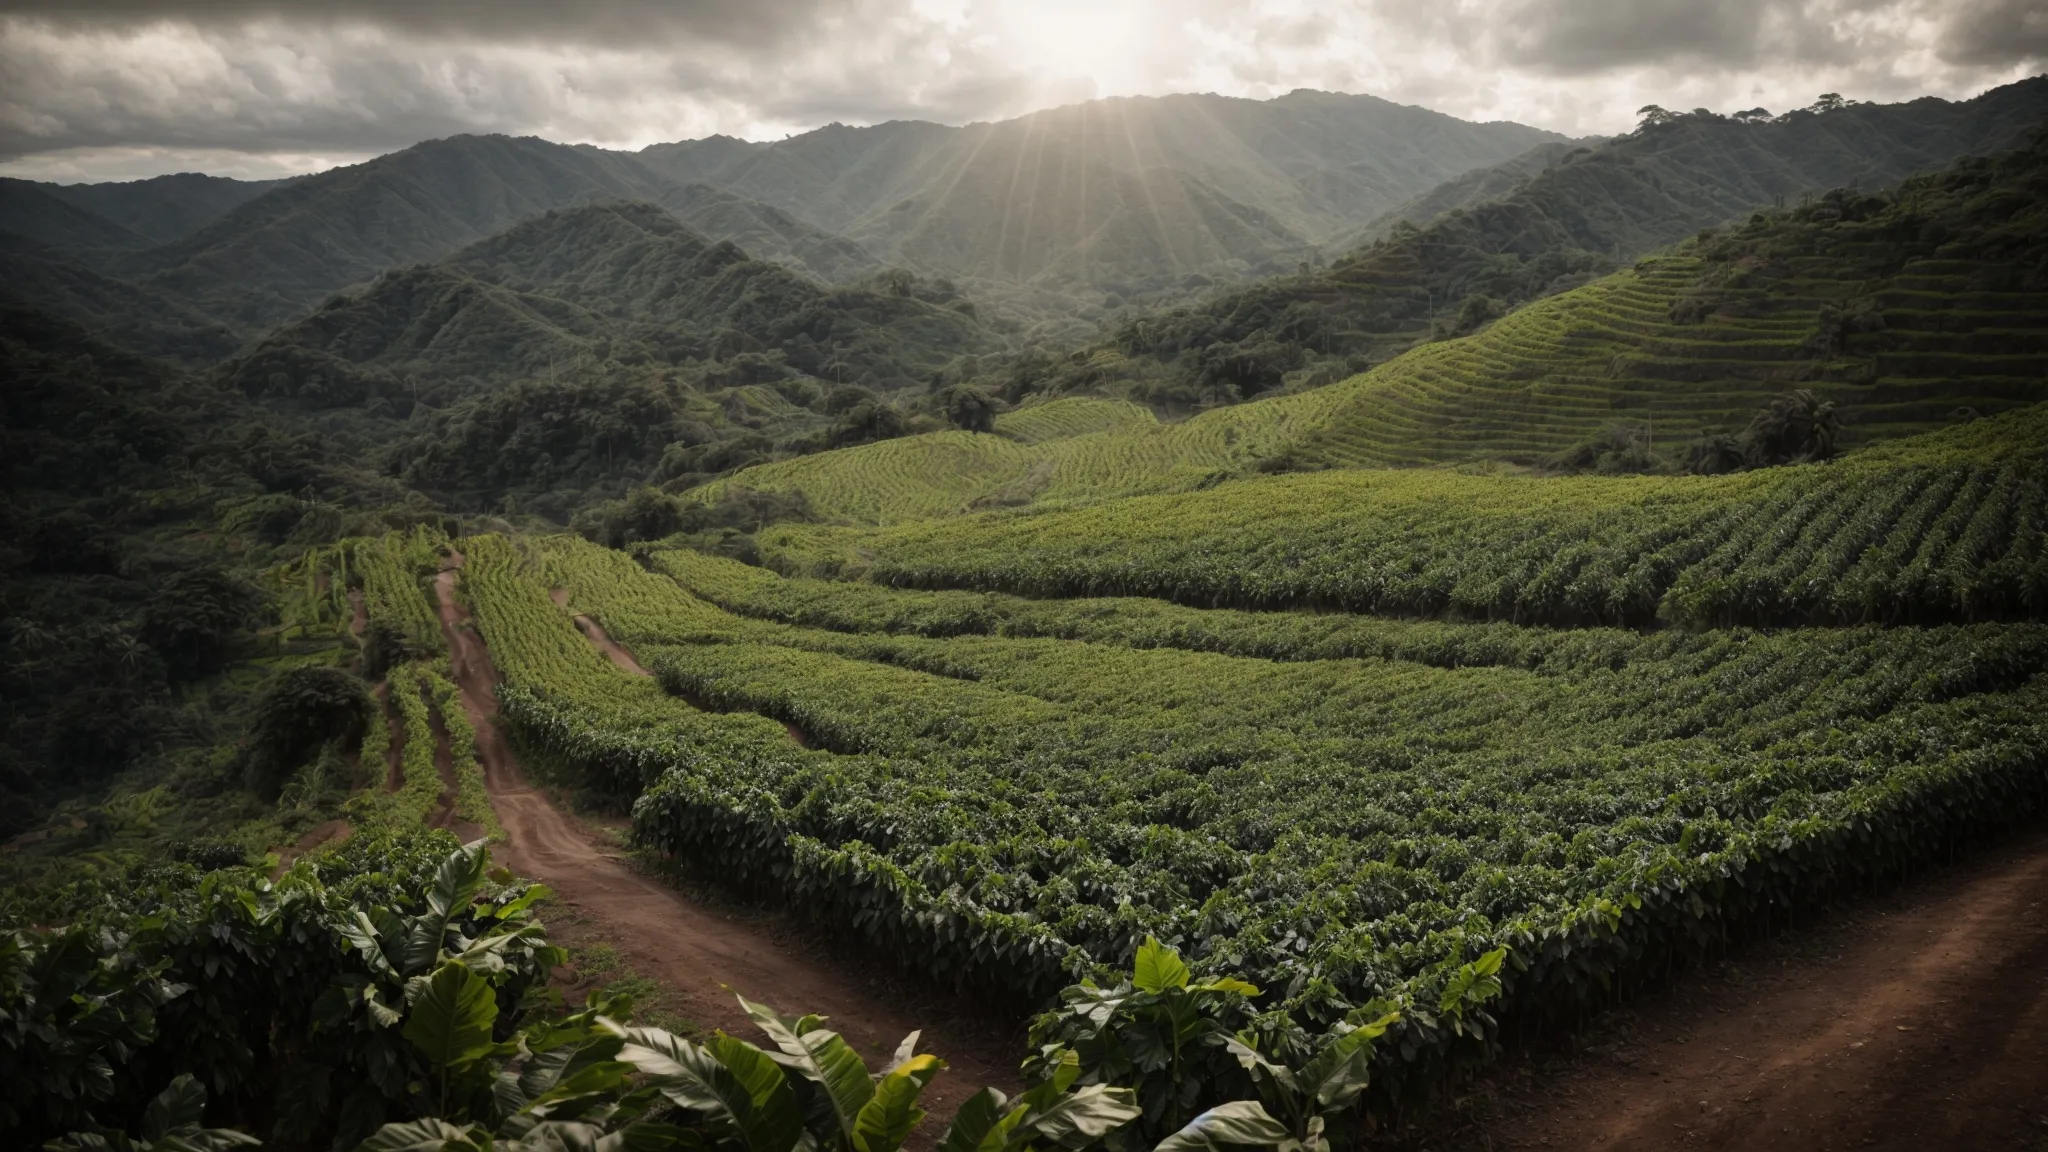 a sprawling honduran coffee plantation with modern irrigation systems, under the tropical sun, illustrates the growth of agribusiness fueled by international investment.